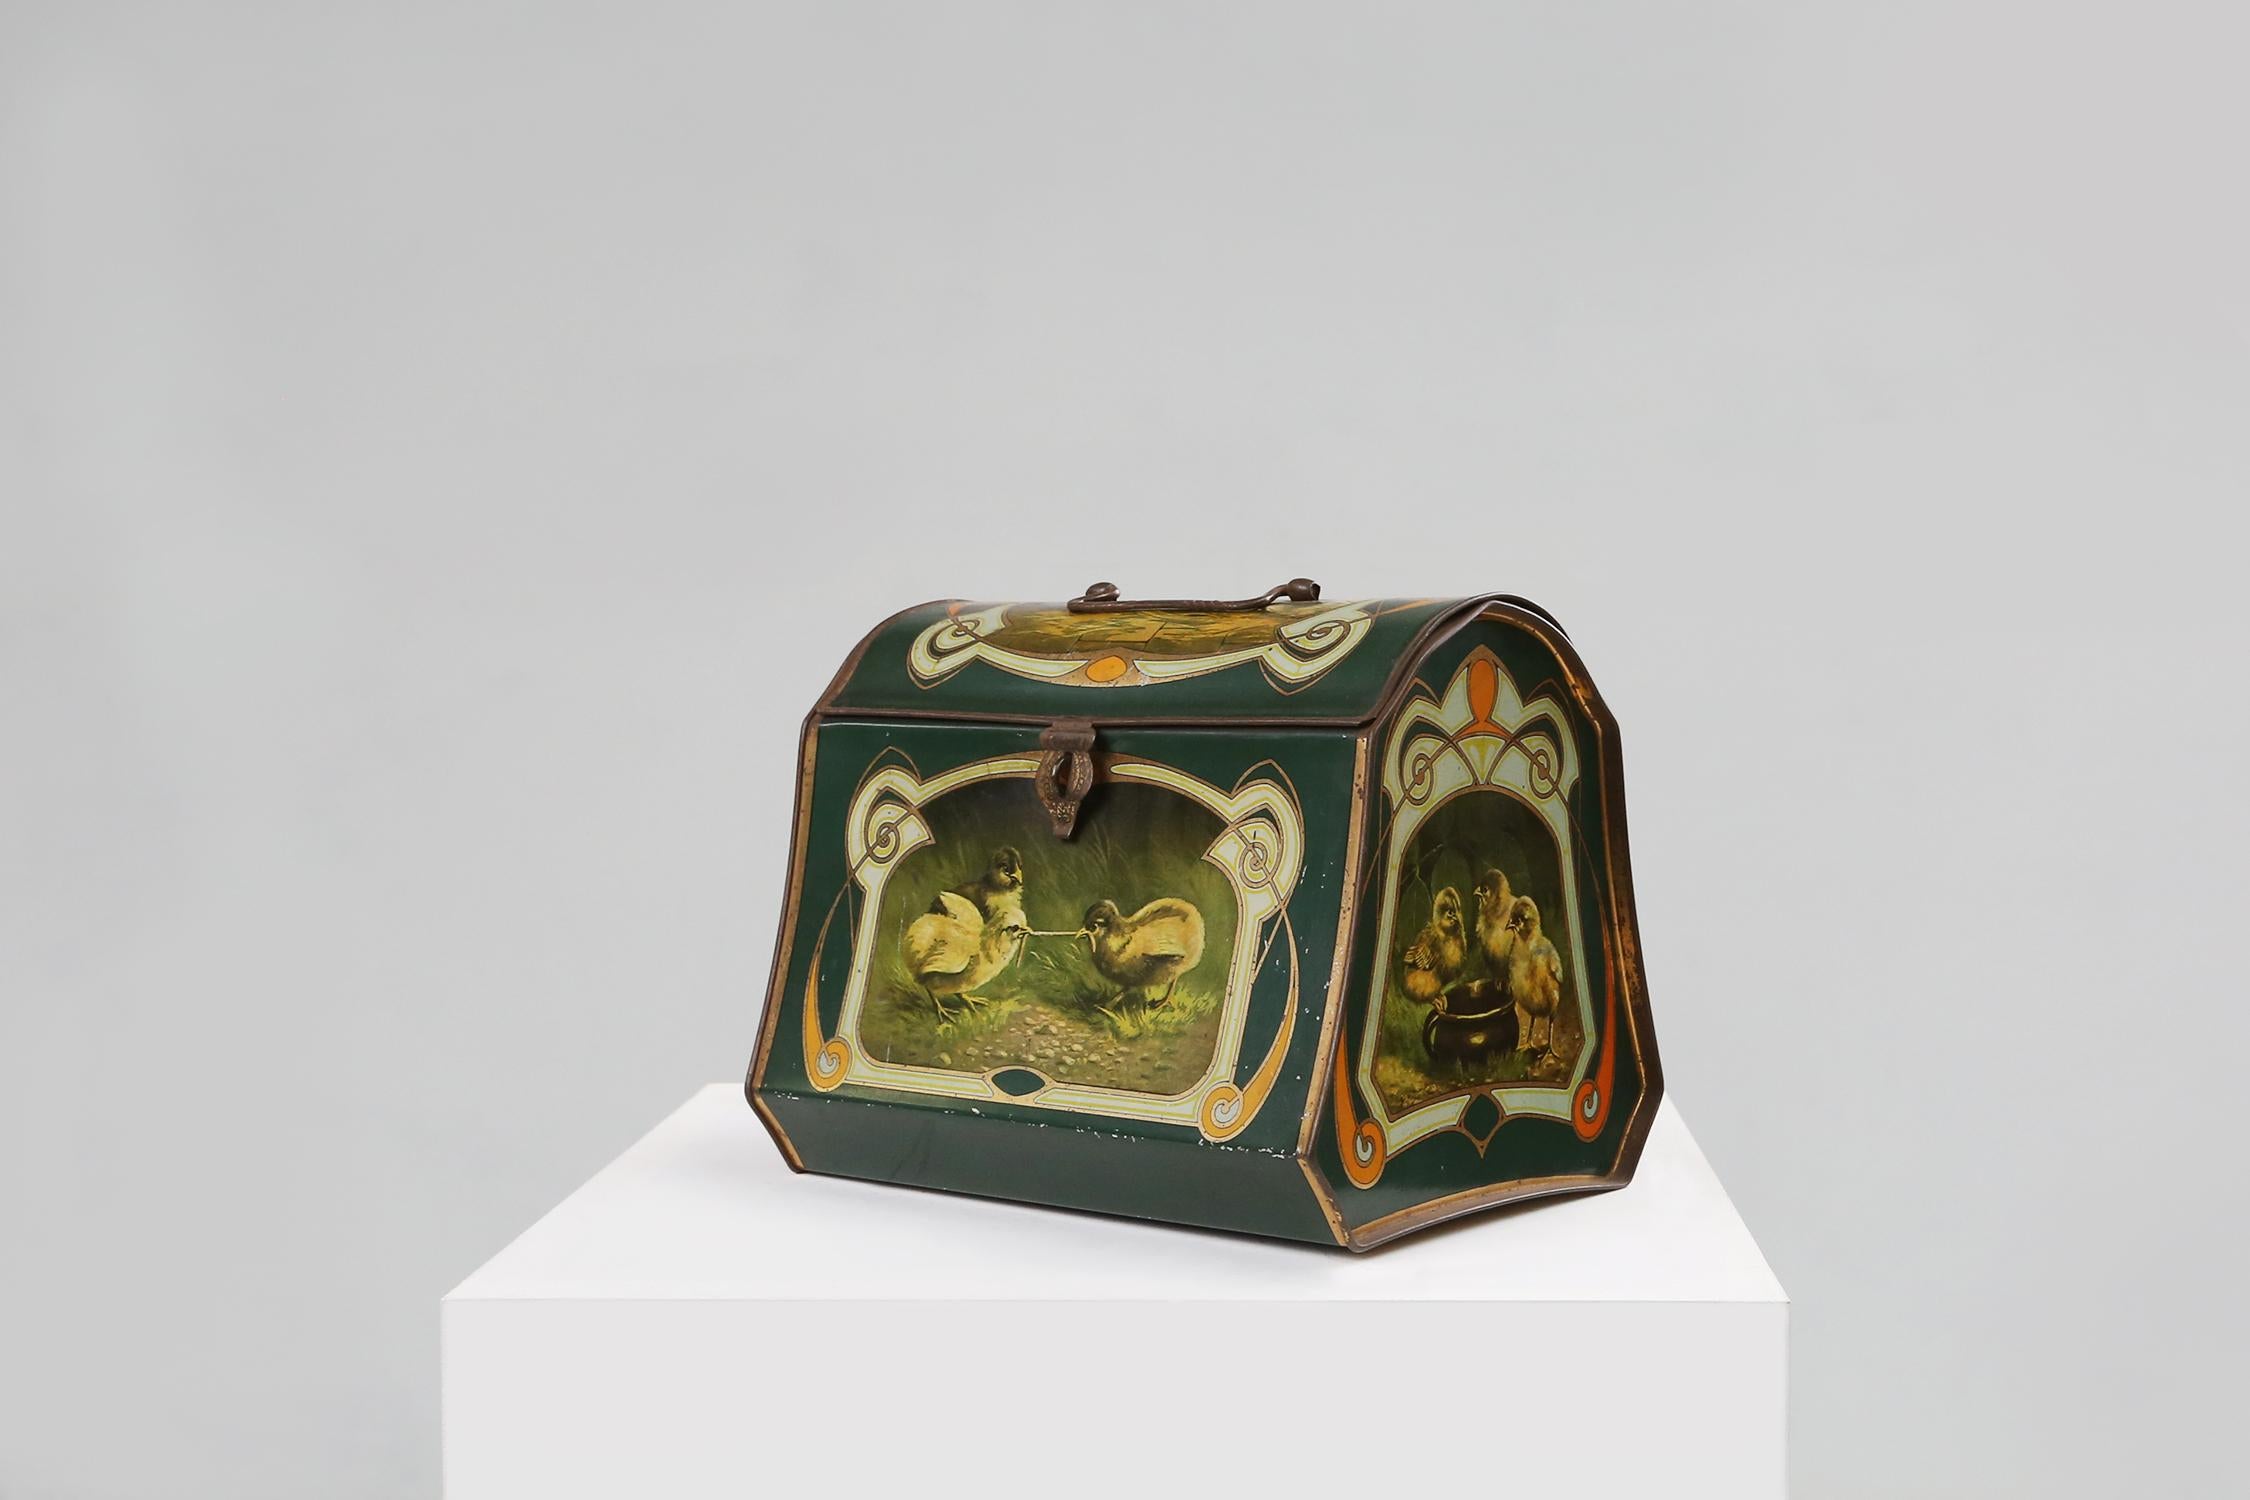 A tin box from the Art Nouveau period is a beautiful example of the artistic movement that flourished in Europe at the end of the 19th and beginning of the 20th century. The Art Nouveau is characterized by graceful lines, organic shapes, natural